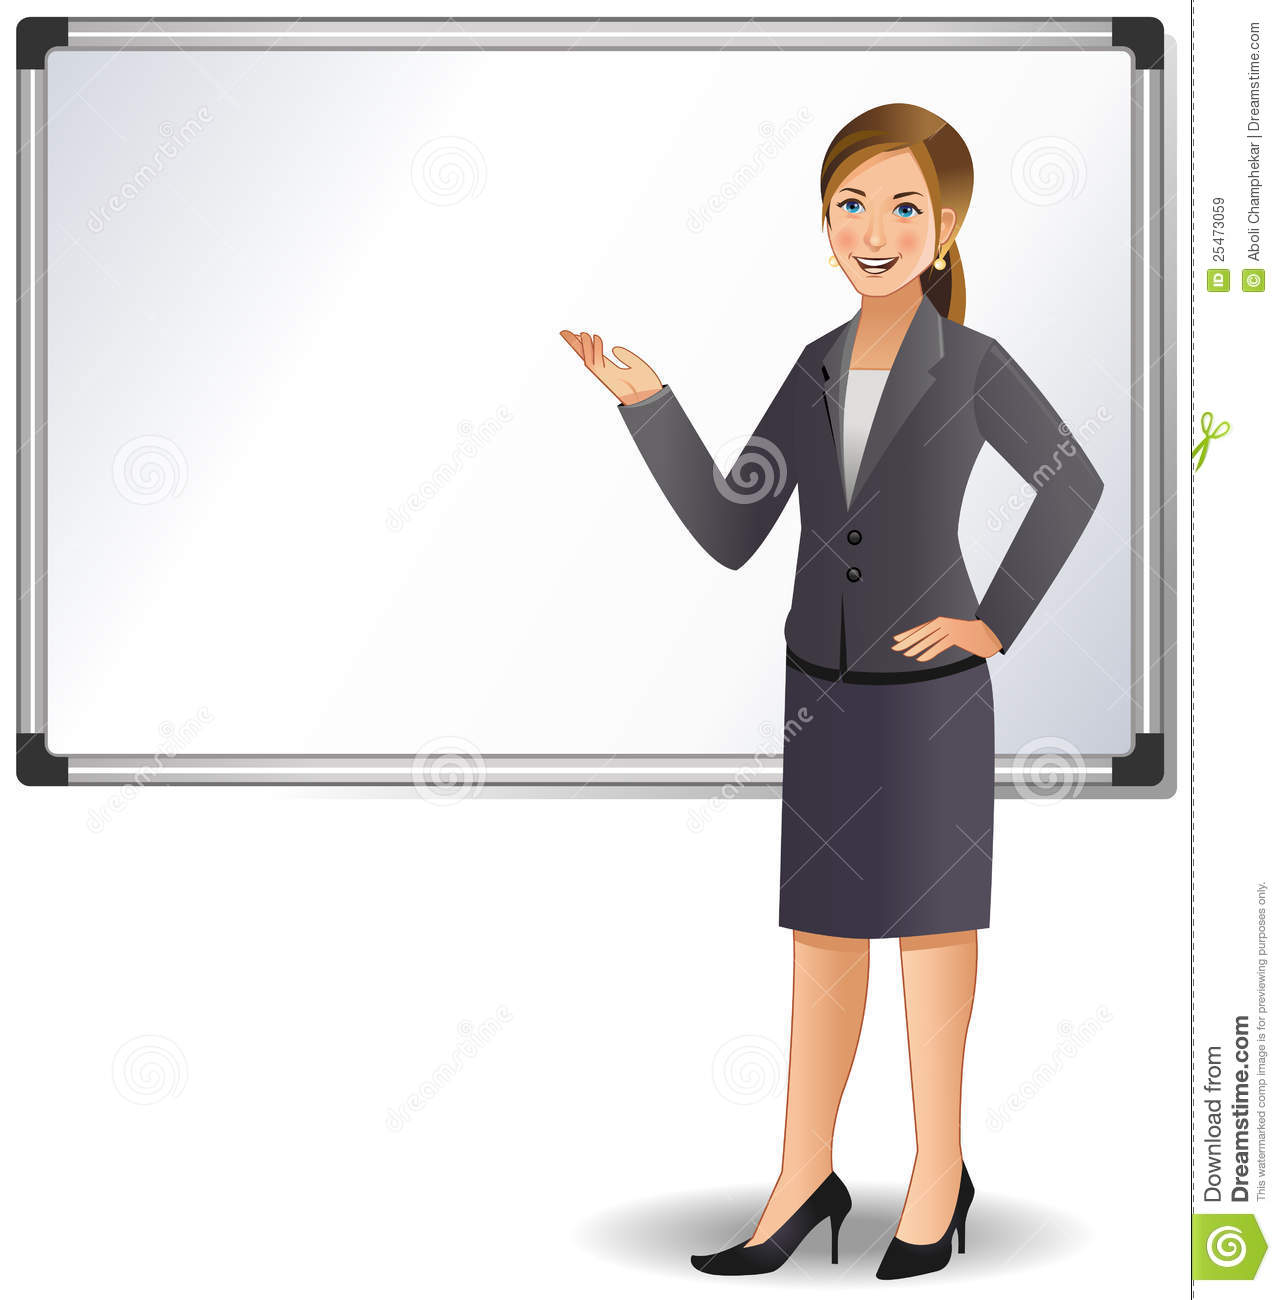 Businesswoman In Front Of A Whiteboard About To Begin A Presentation 